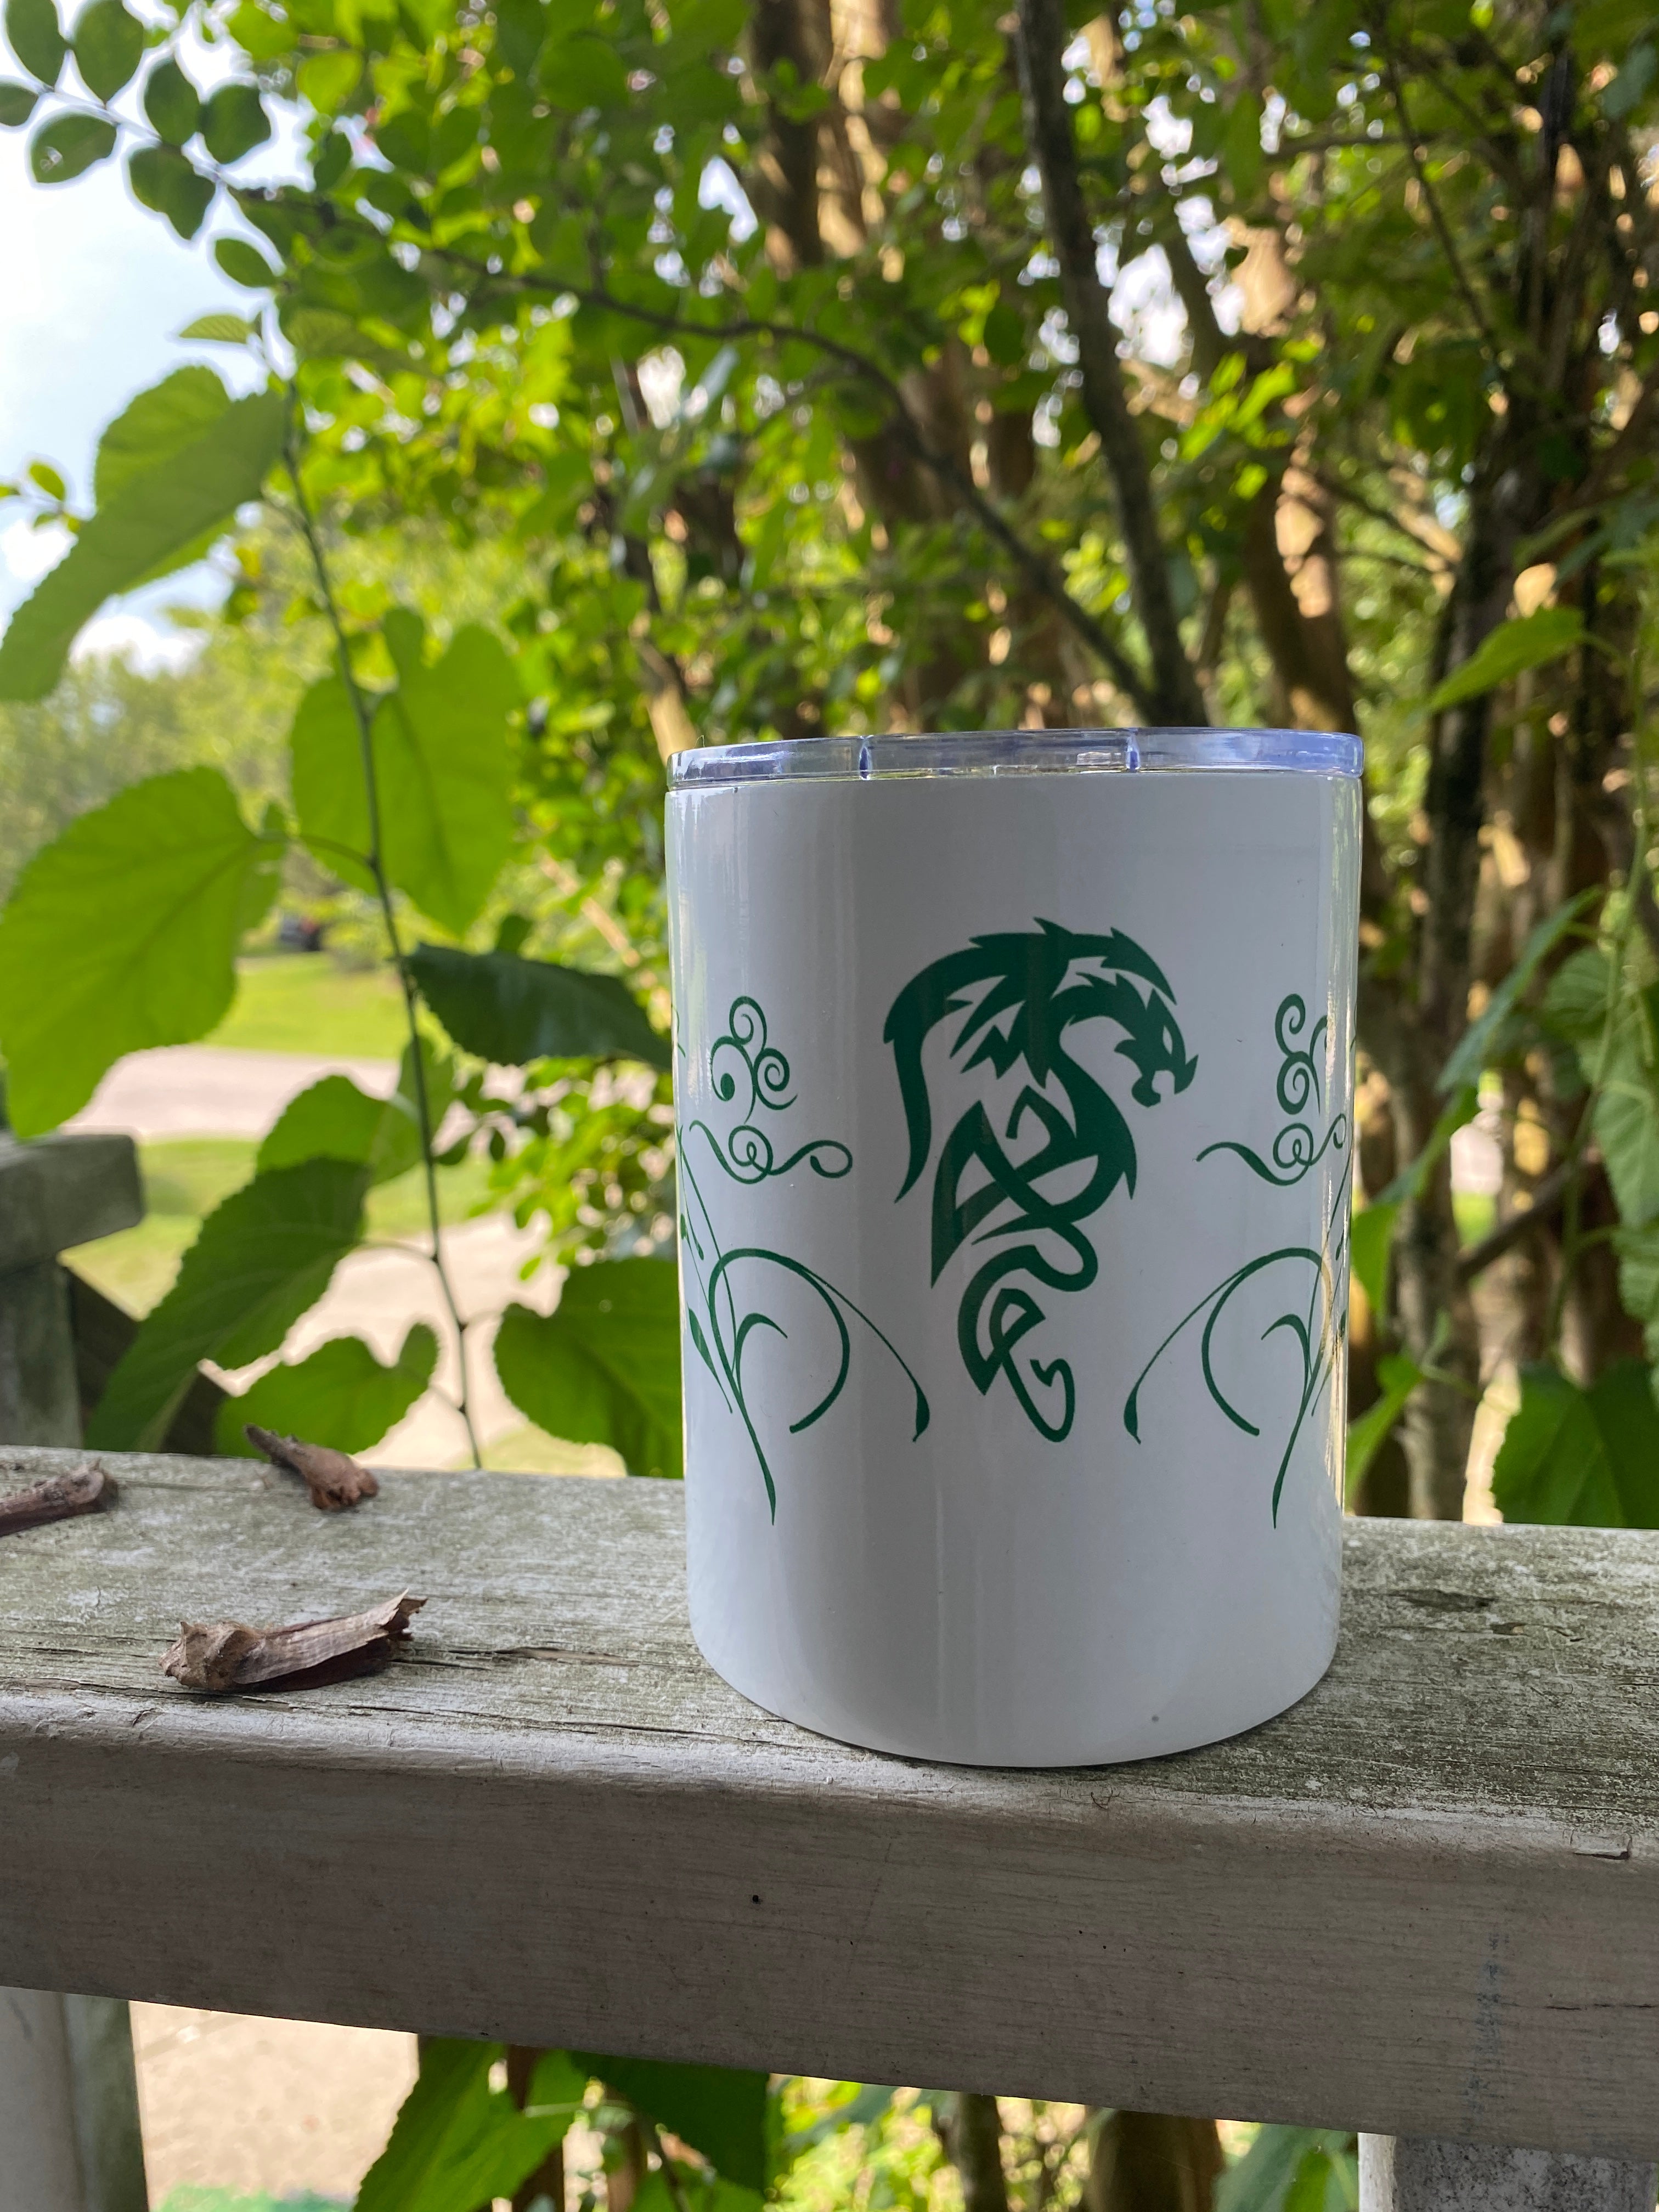 The 10oz tumbler sitting outside on a ledge with beautiful, lush greenery behind it. It has a dragon design